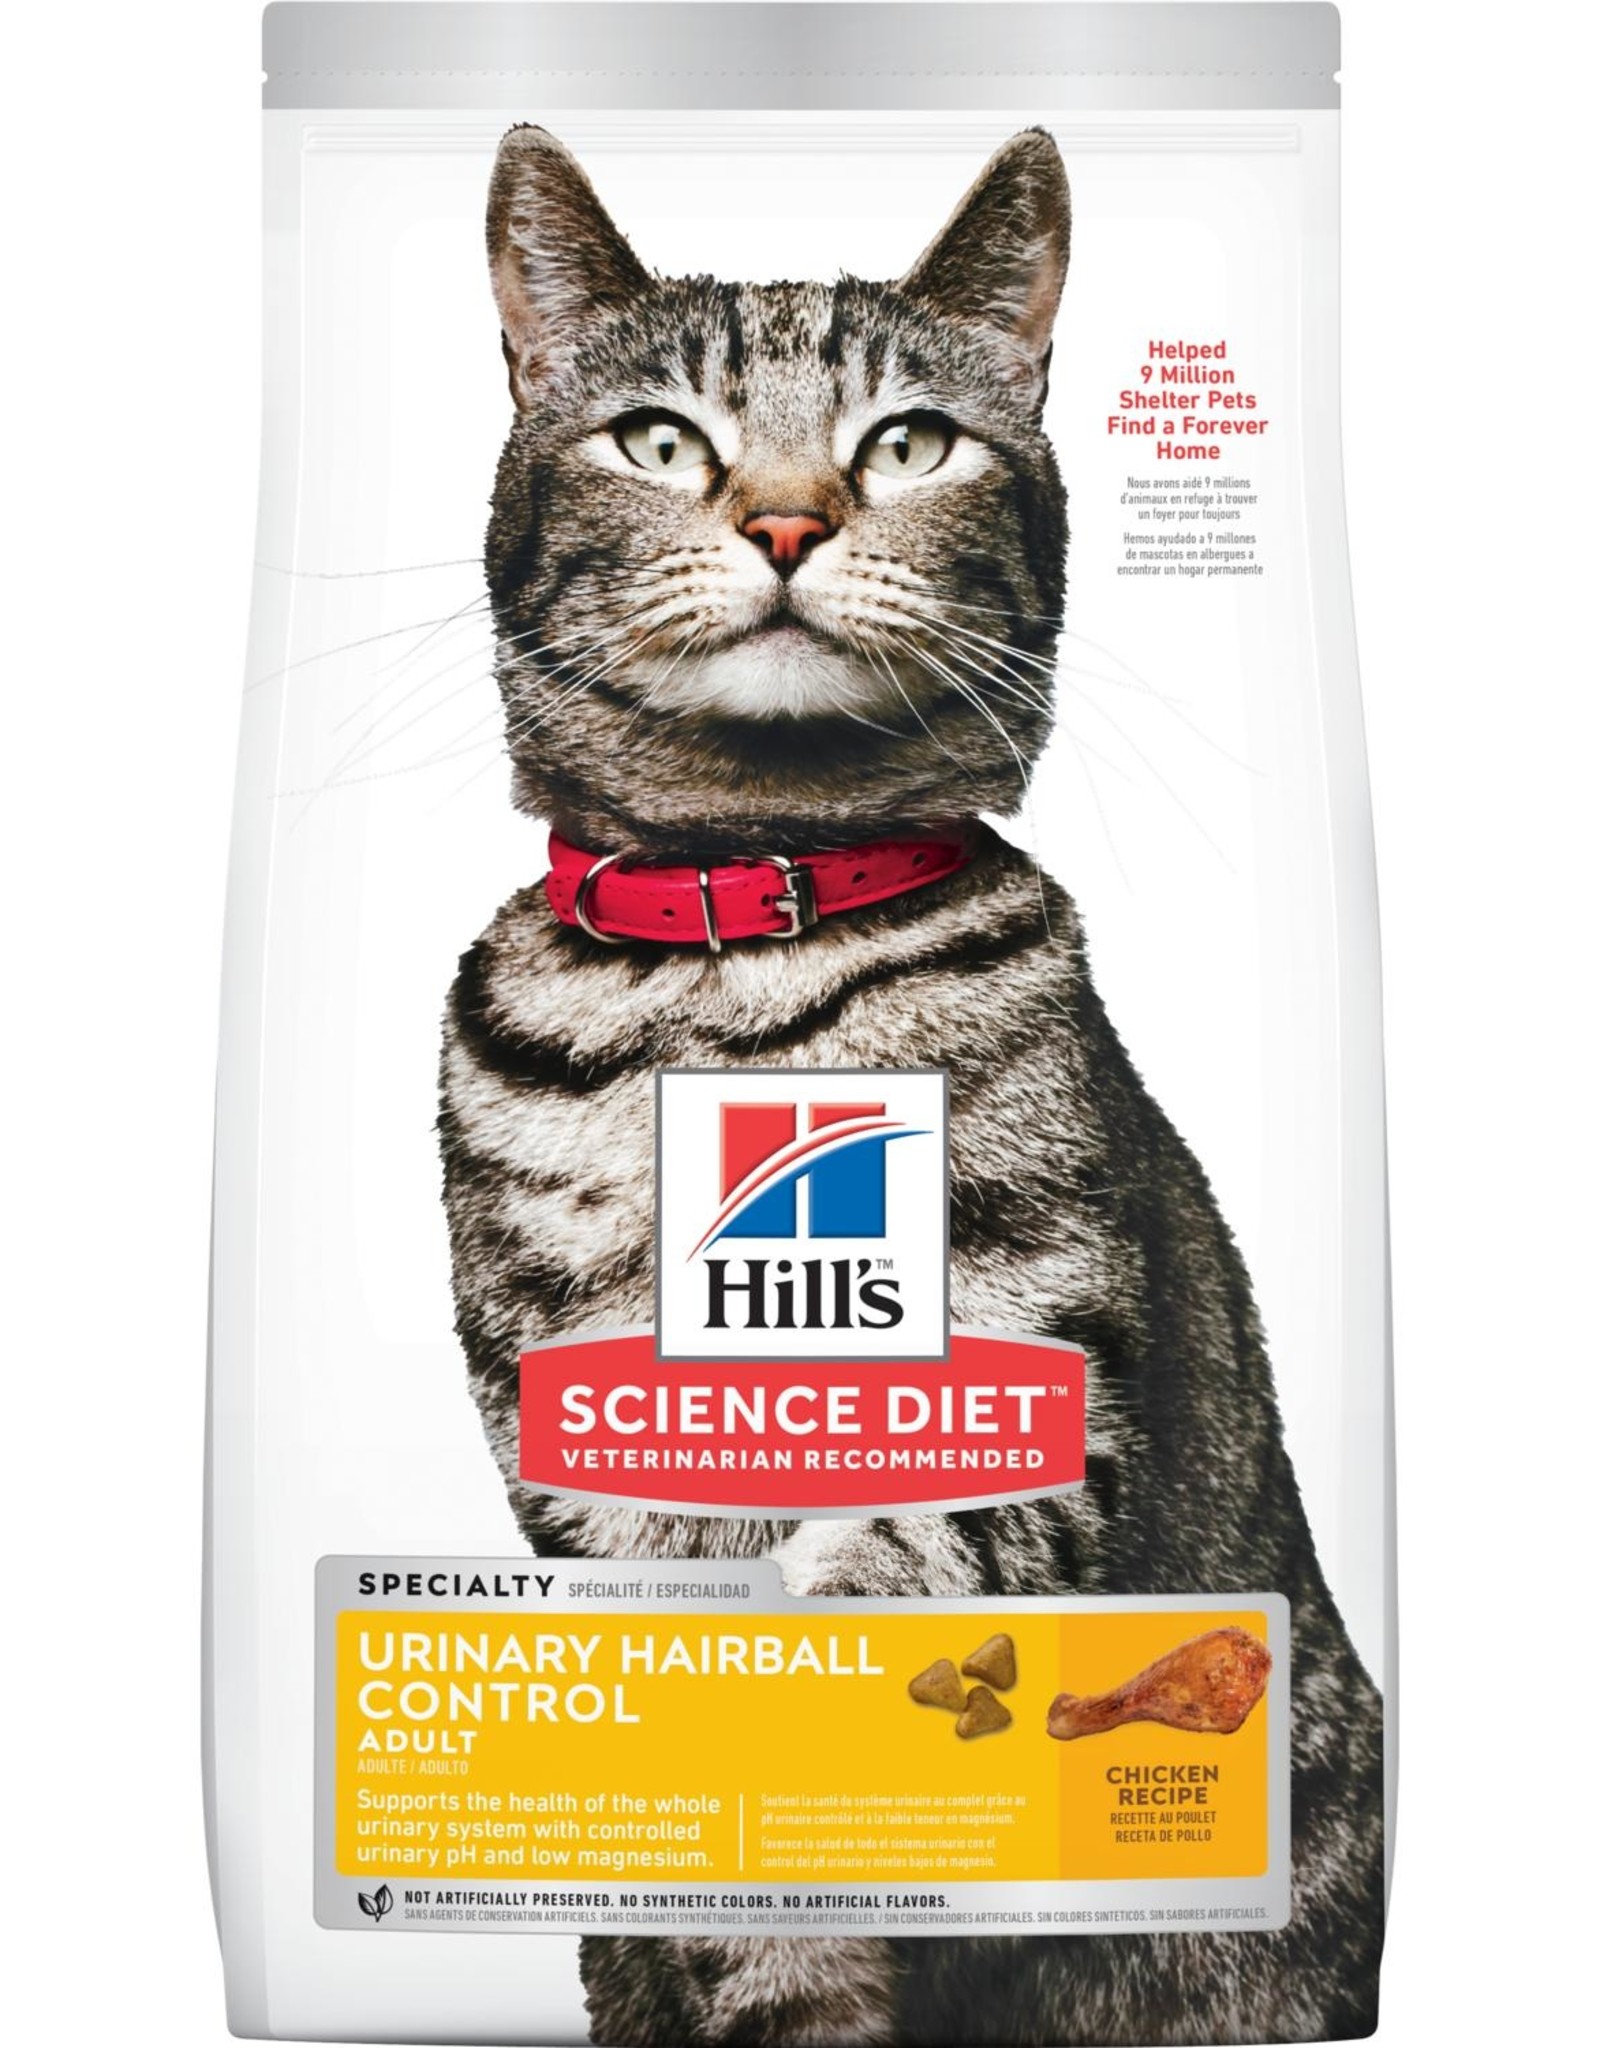 SCIENCE DIET HILL'S SCIENCE DIET FELINE ADULT URINARY HAIRBALL CONTROL 7LBS